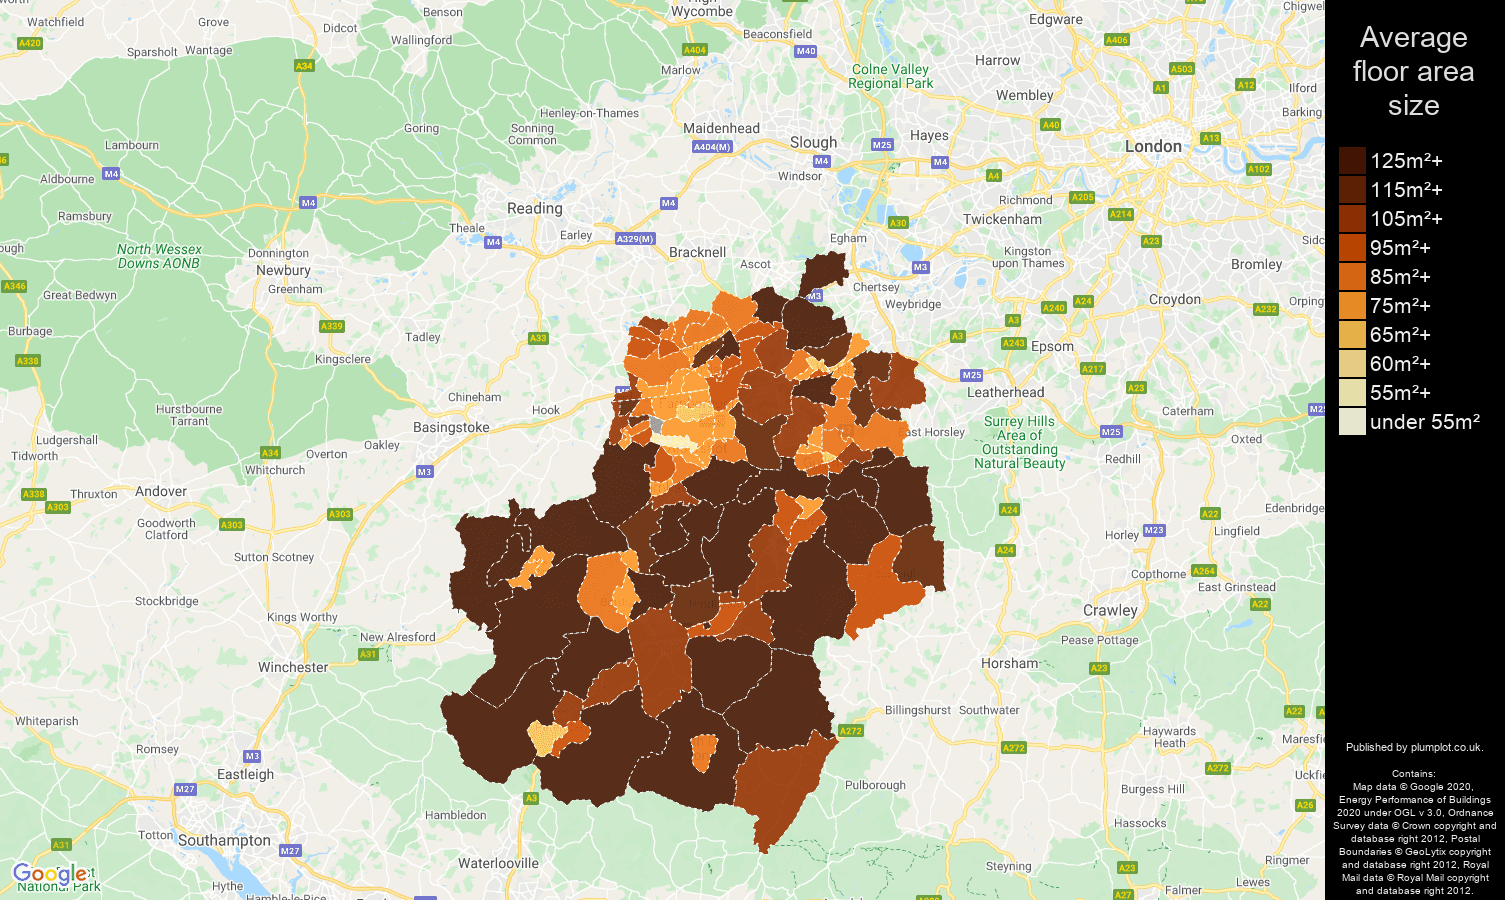 Guildford map of average floor area size of properties